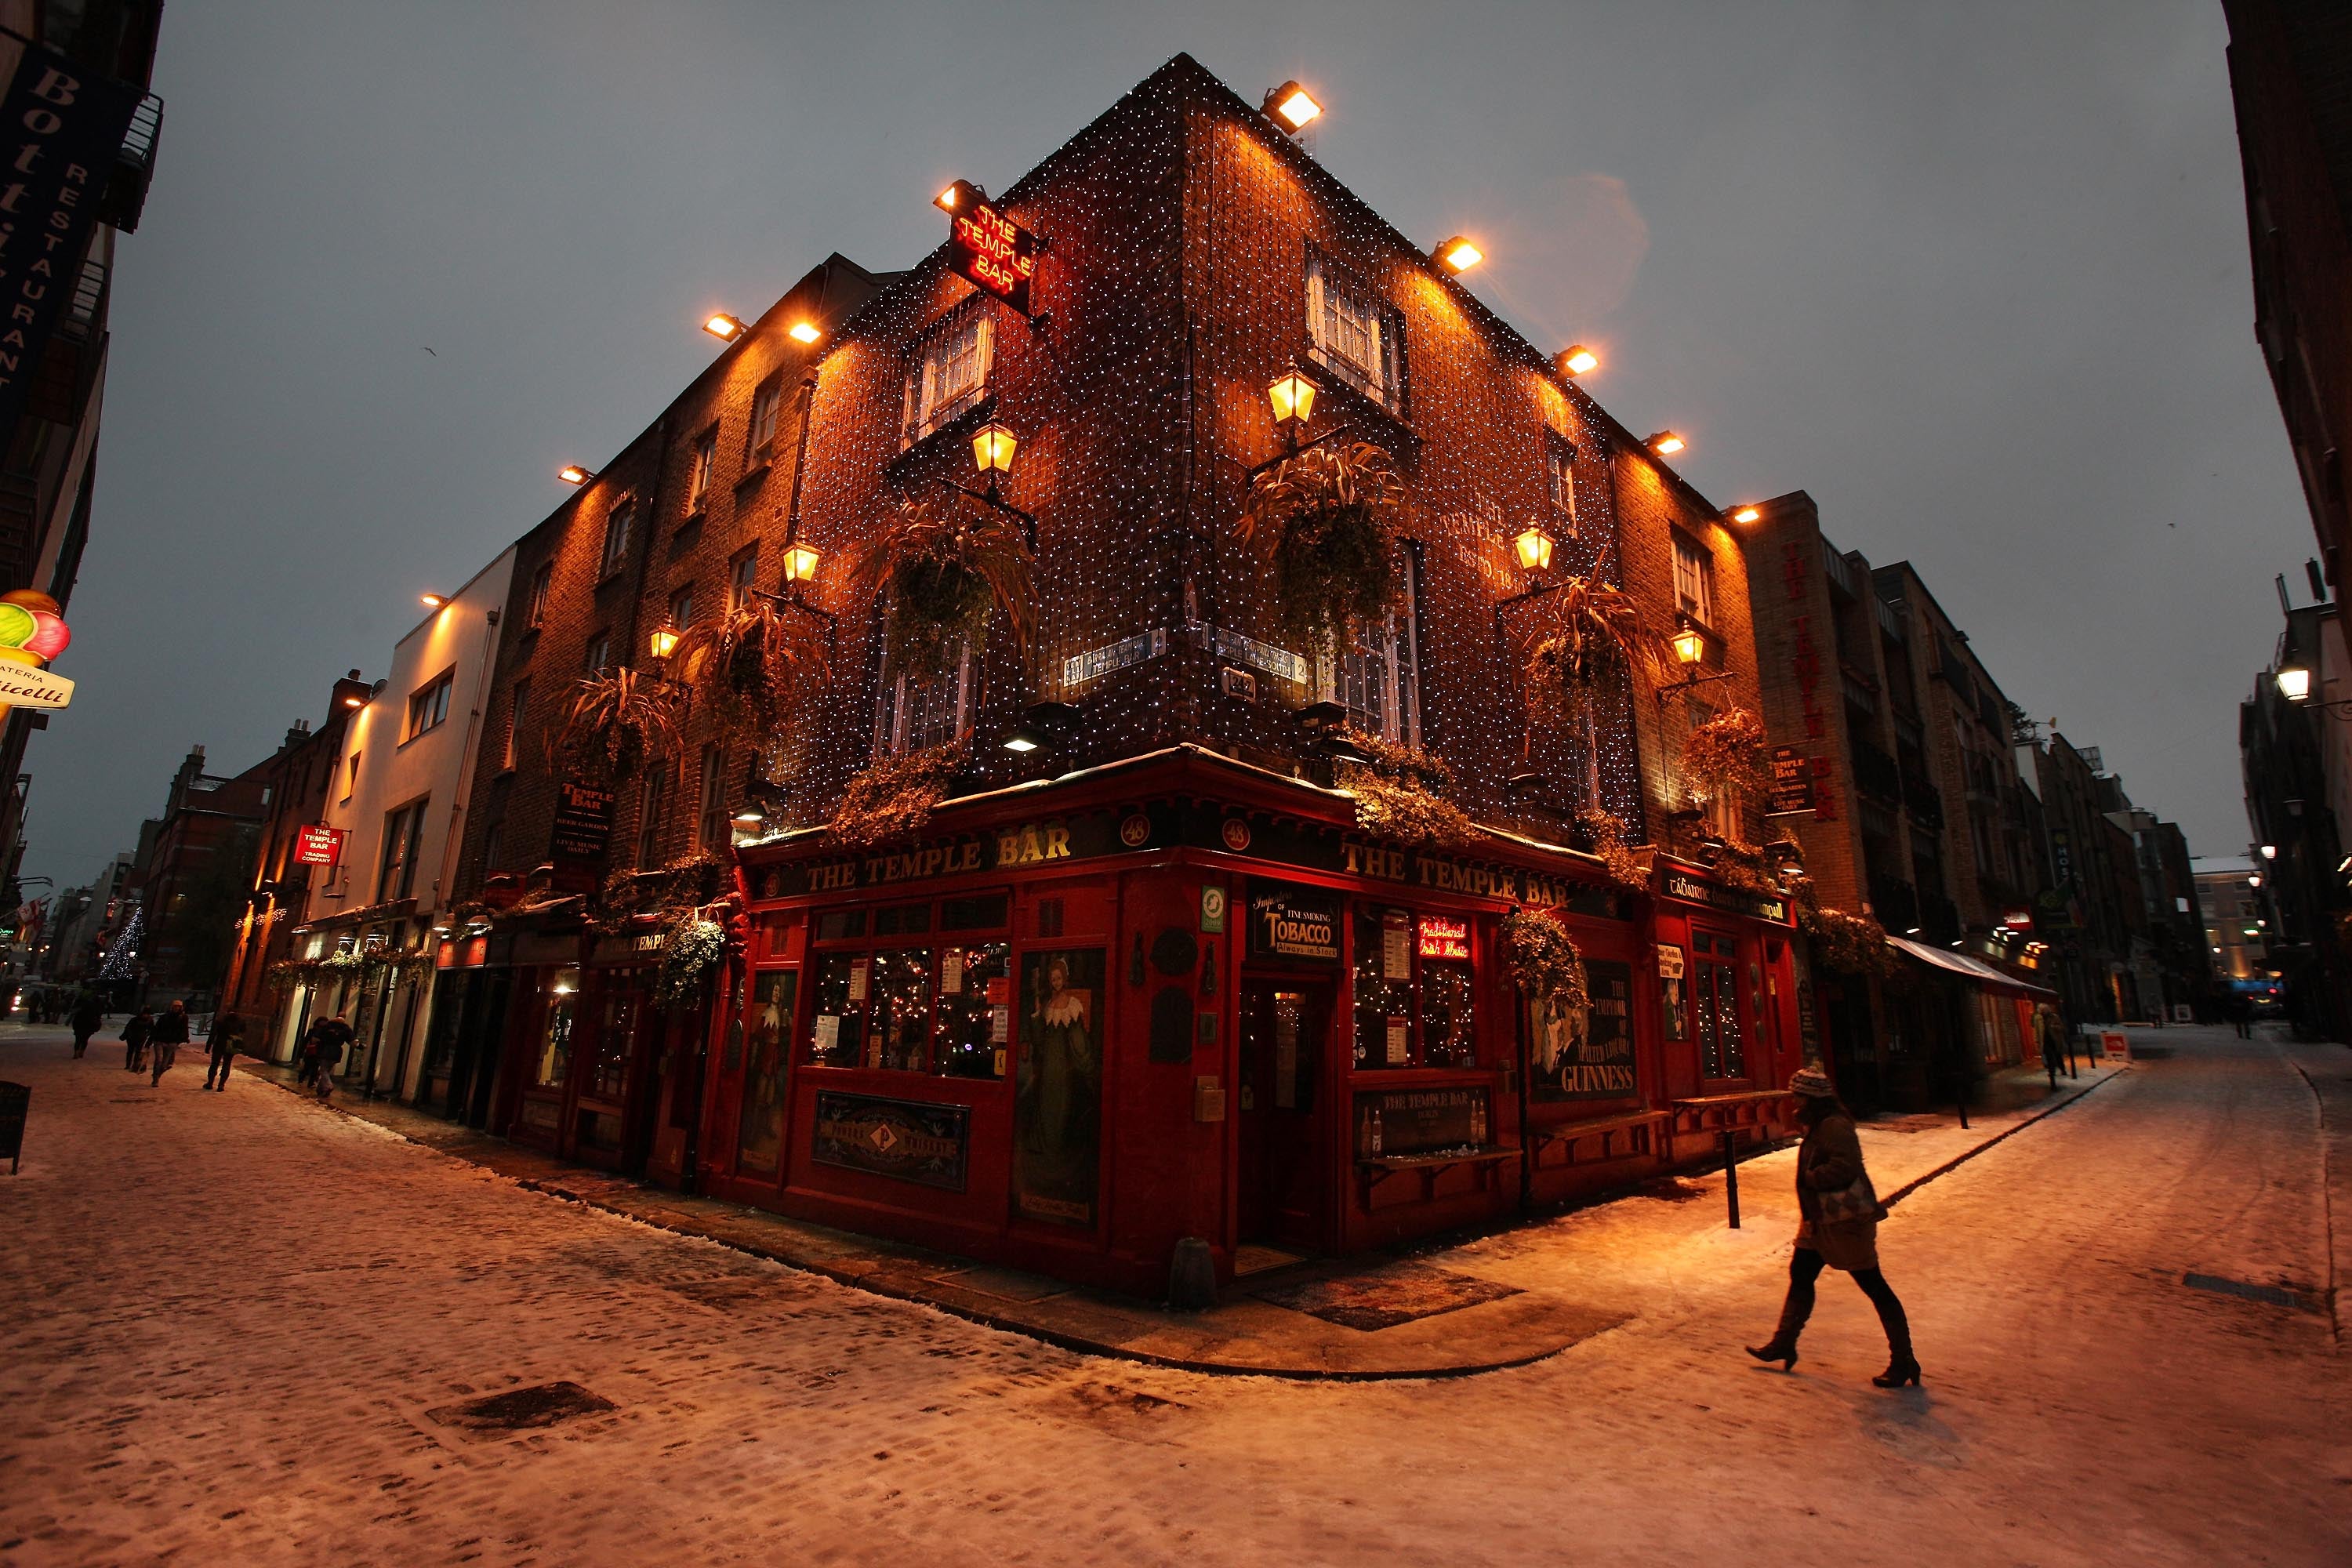 The Temple Bar pub in Dublin is swathed in Christmas decorations 